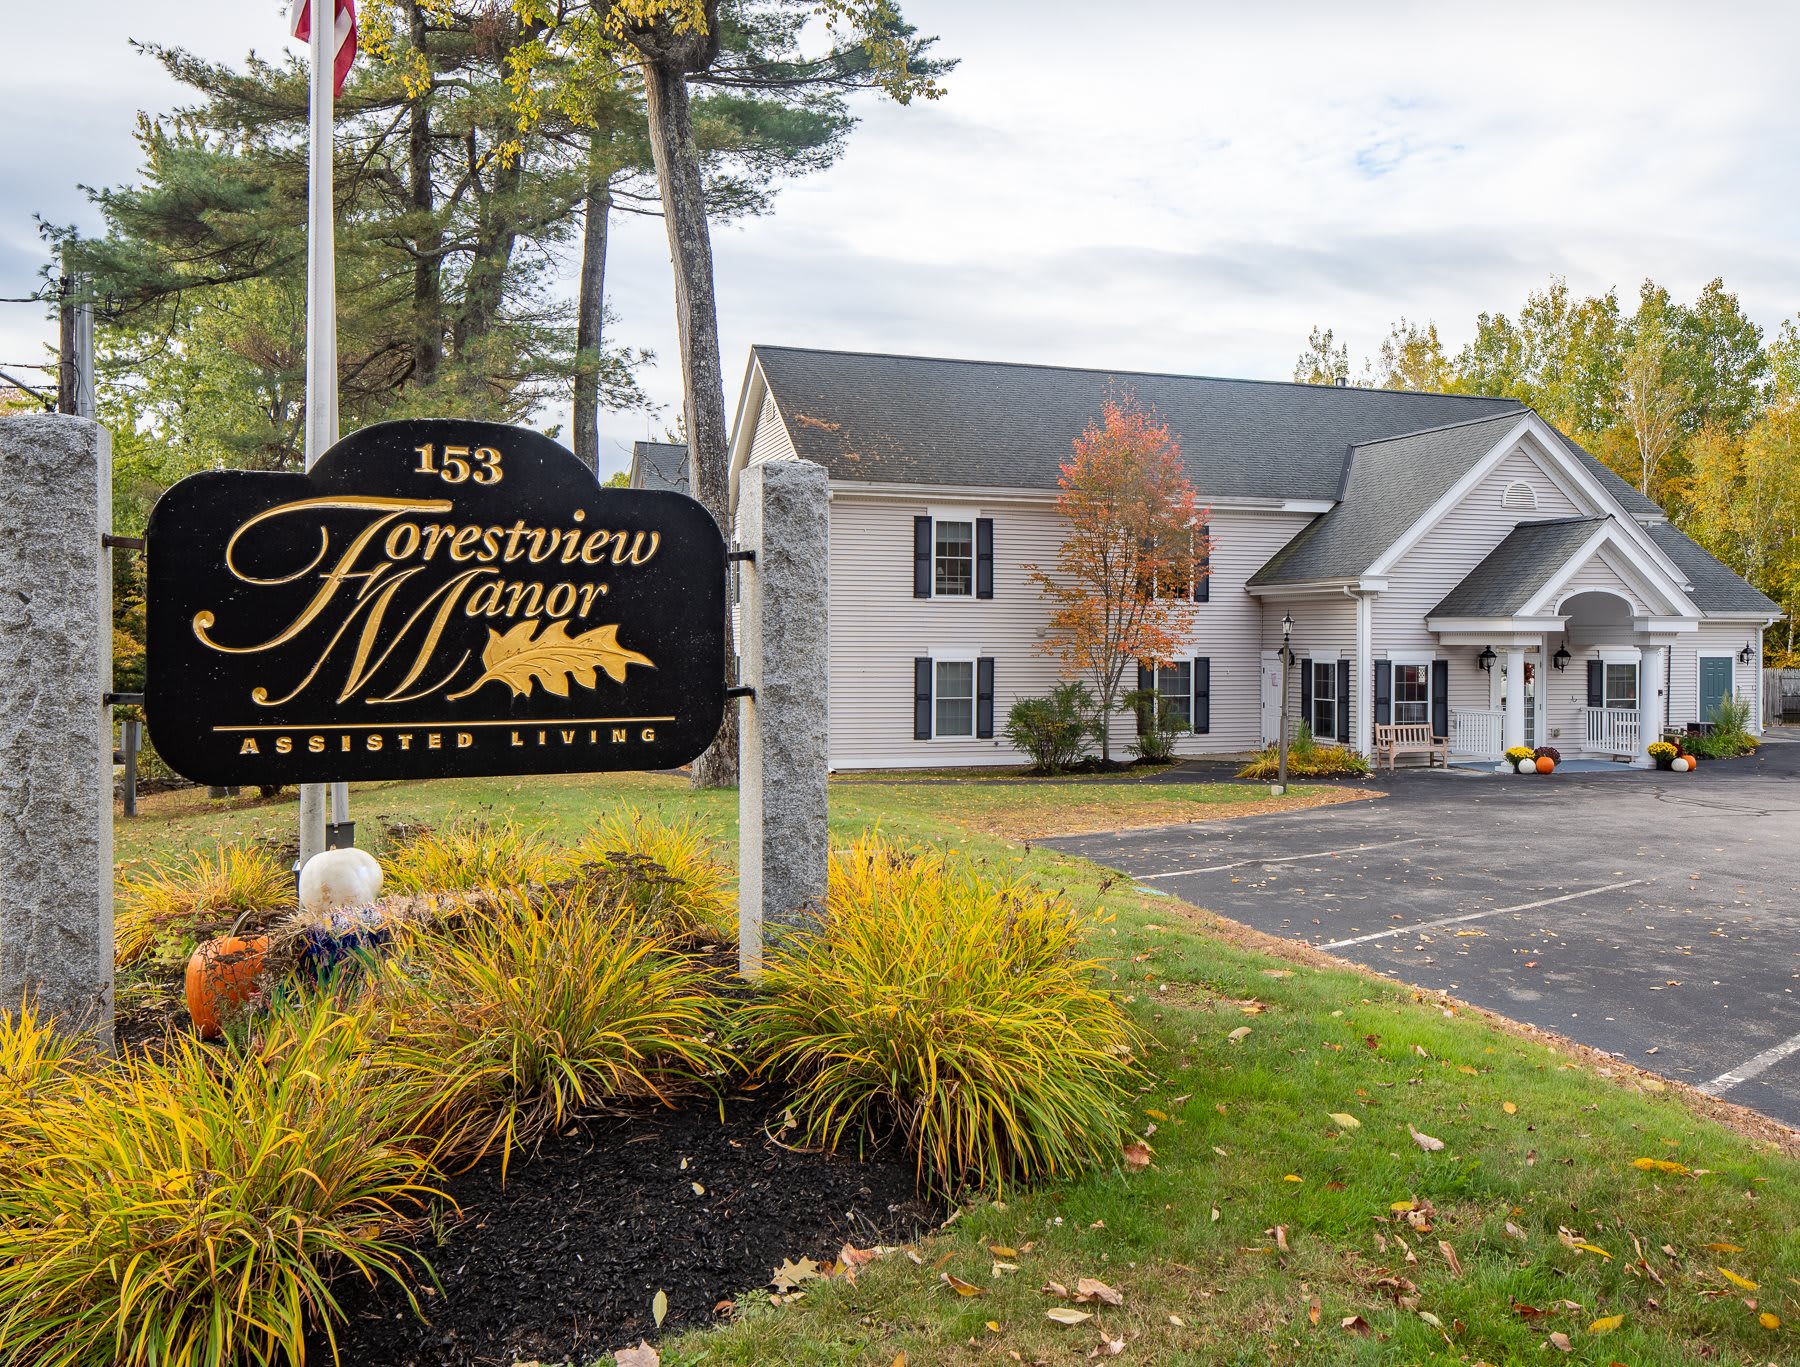 Forestview Manor Assisted Living community exterior